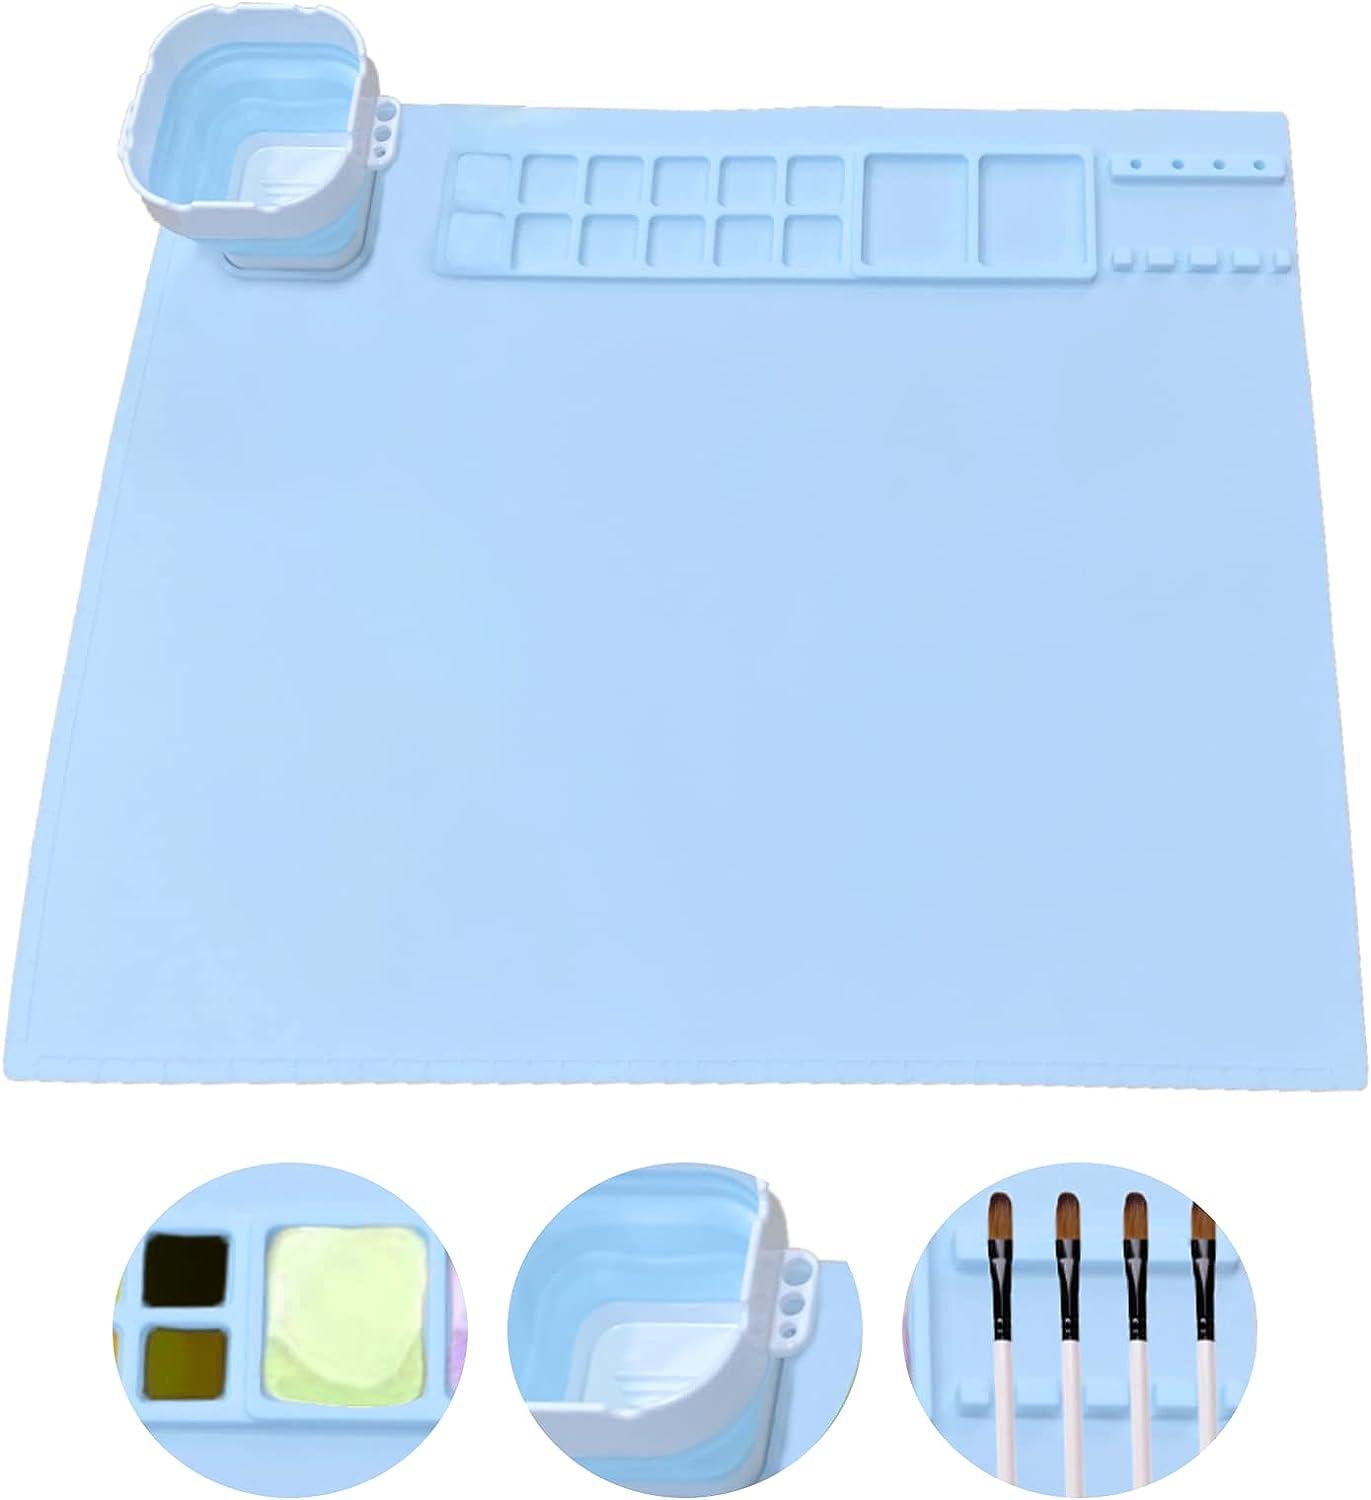 Silicone Craft Mat,painting Mat With Cup, Non Stick Silicone Sheet Creator  Mat For Art,diy Jewelry Casting,drawing,clay